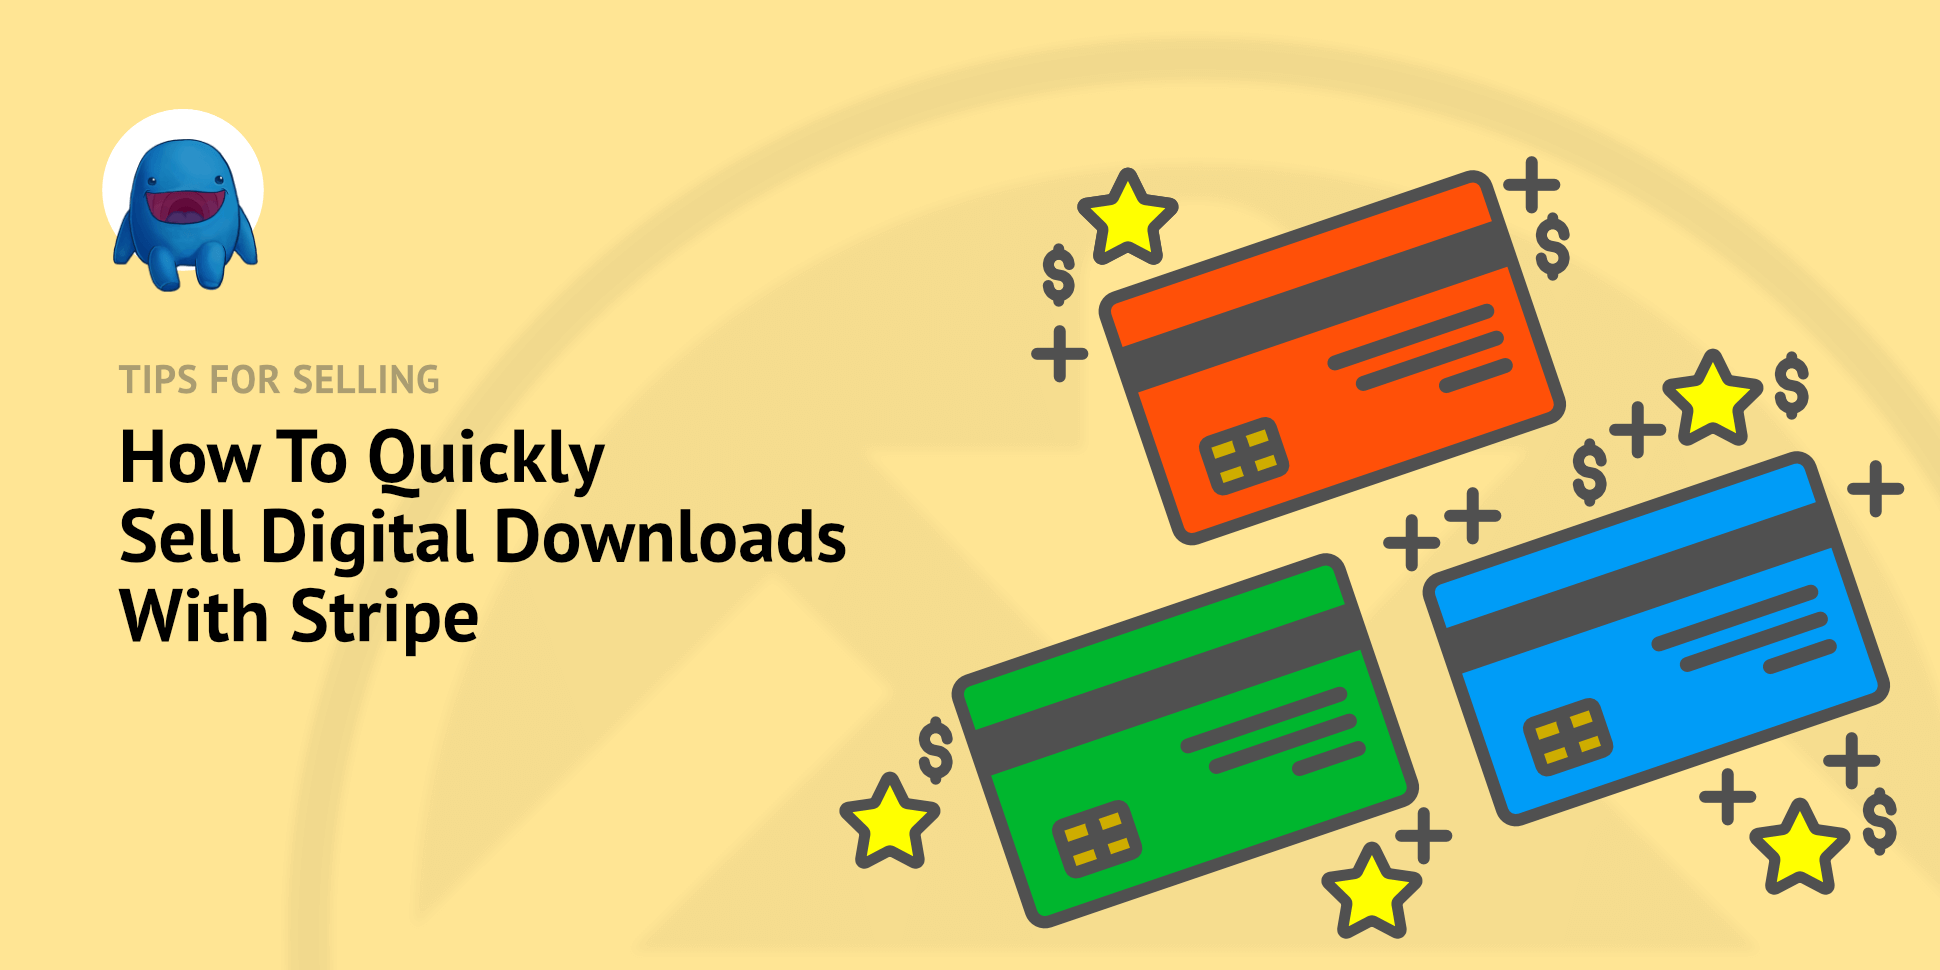 How to Quickly Sell Digital Downloads with Stripe